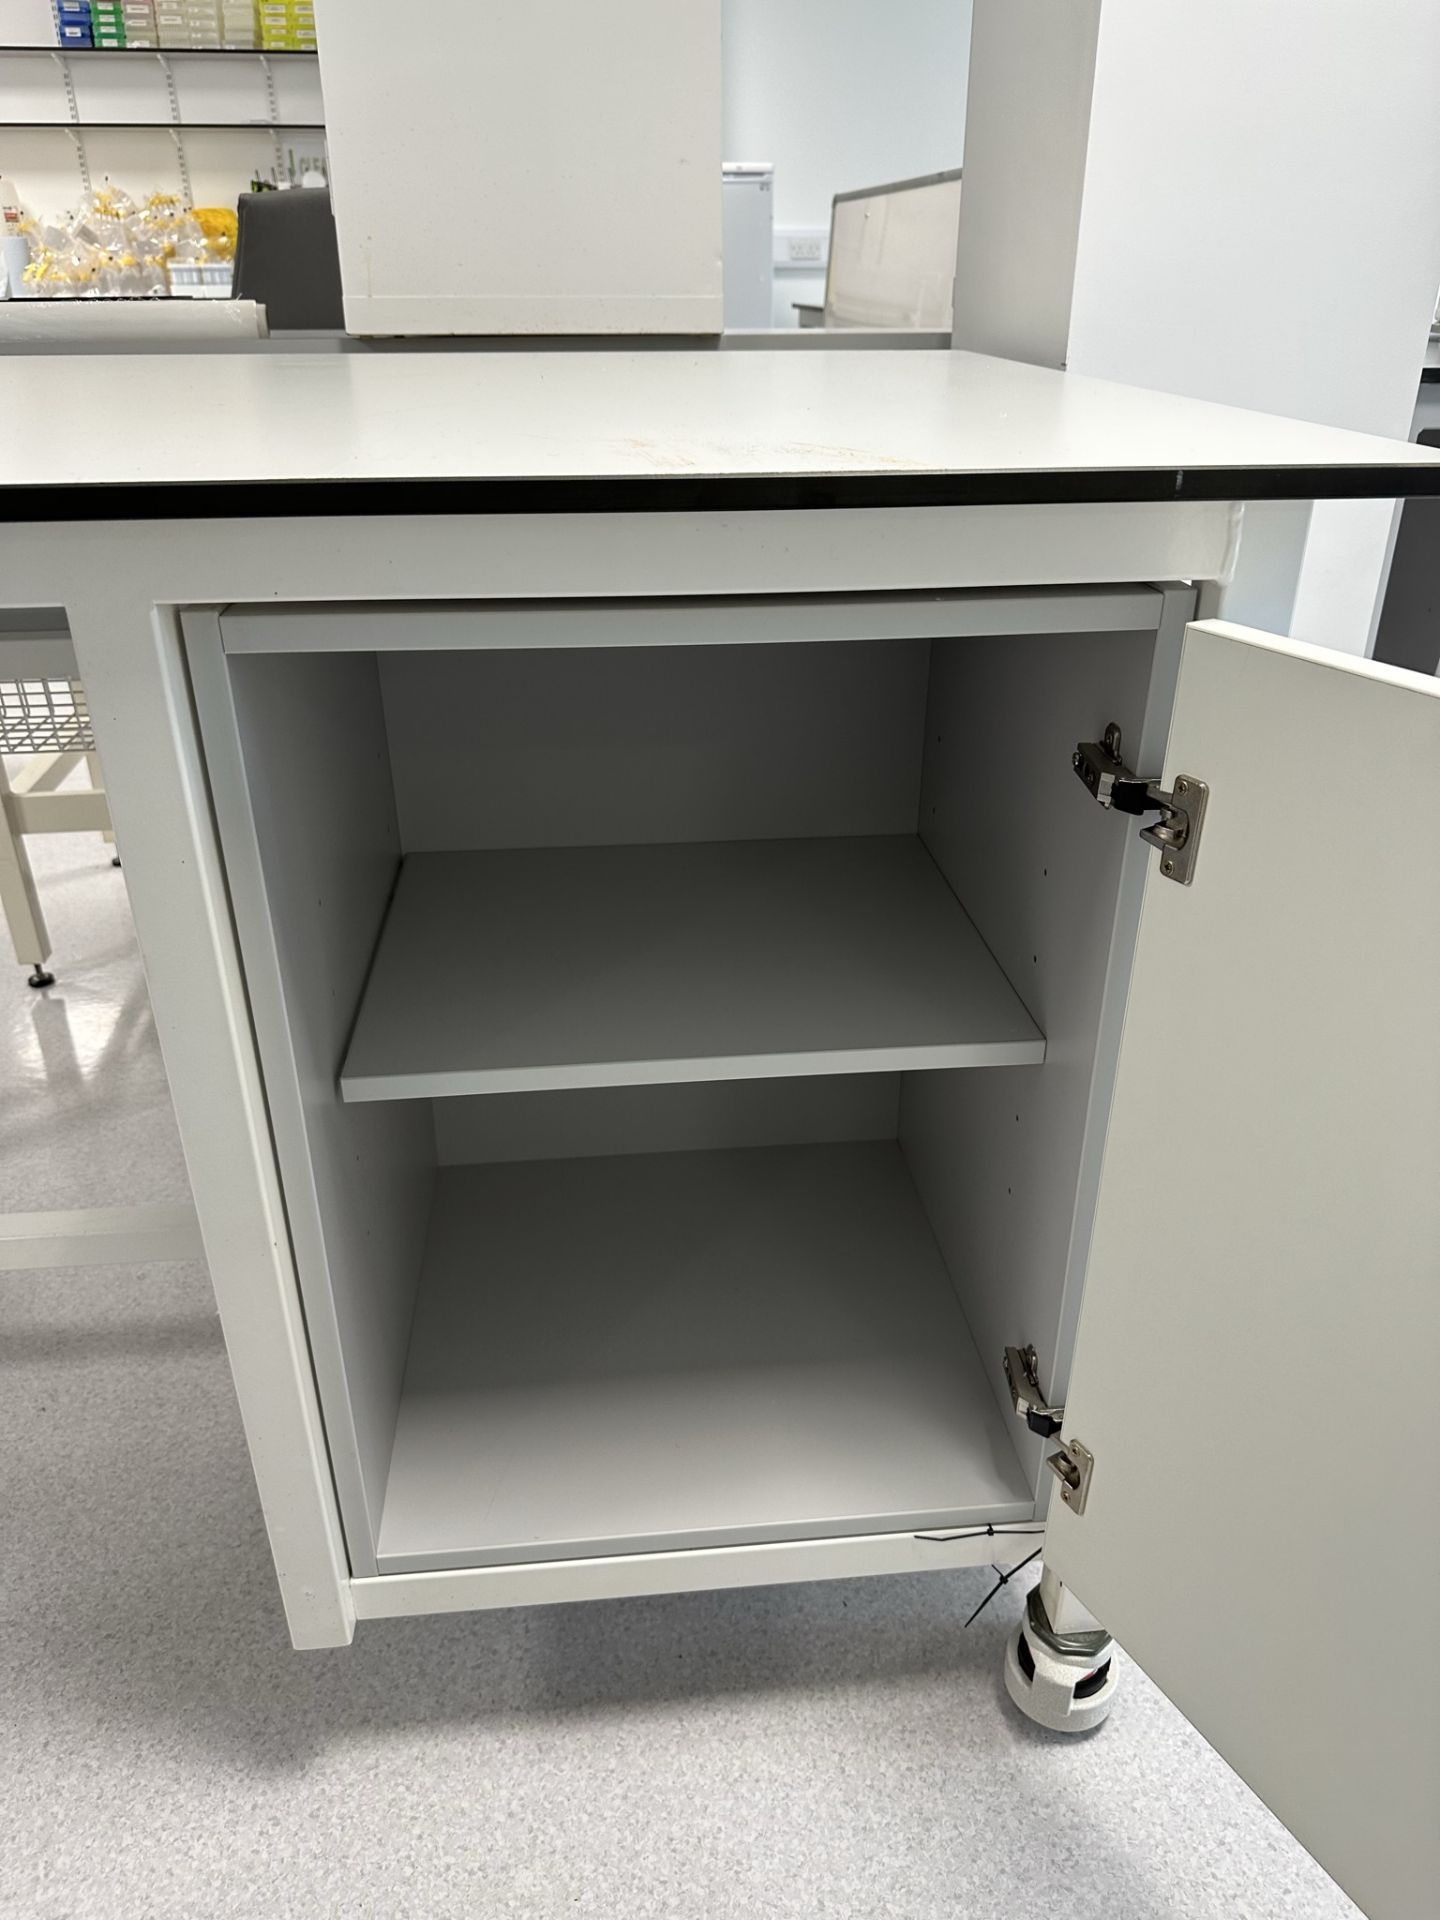 Mobile Laboratory Workbench w/ Storage Cupboard & Power Outlet - Image 3 of 4